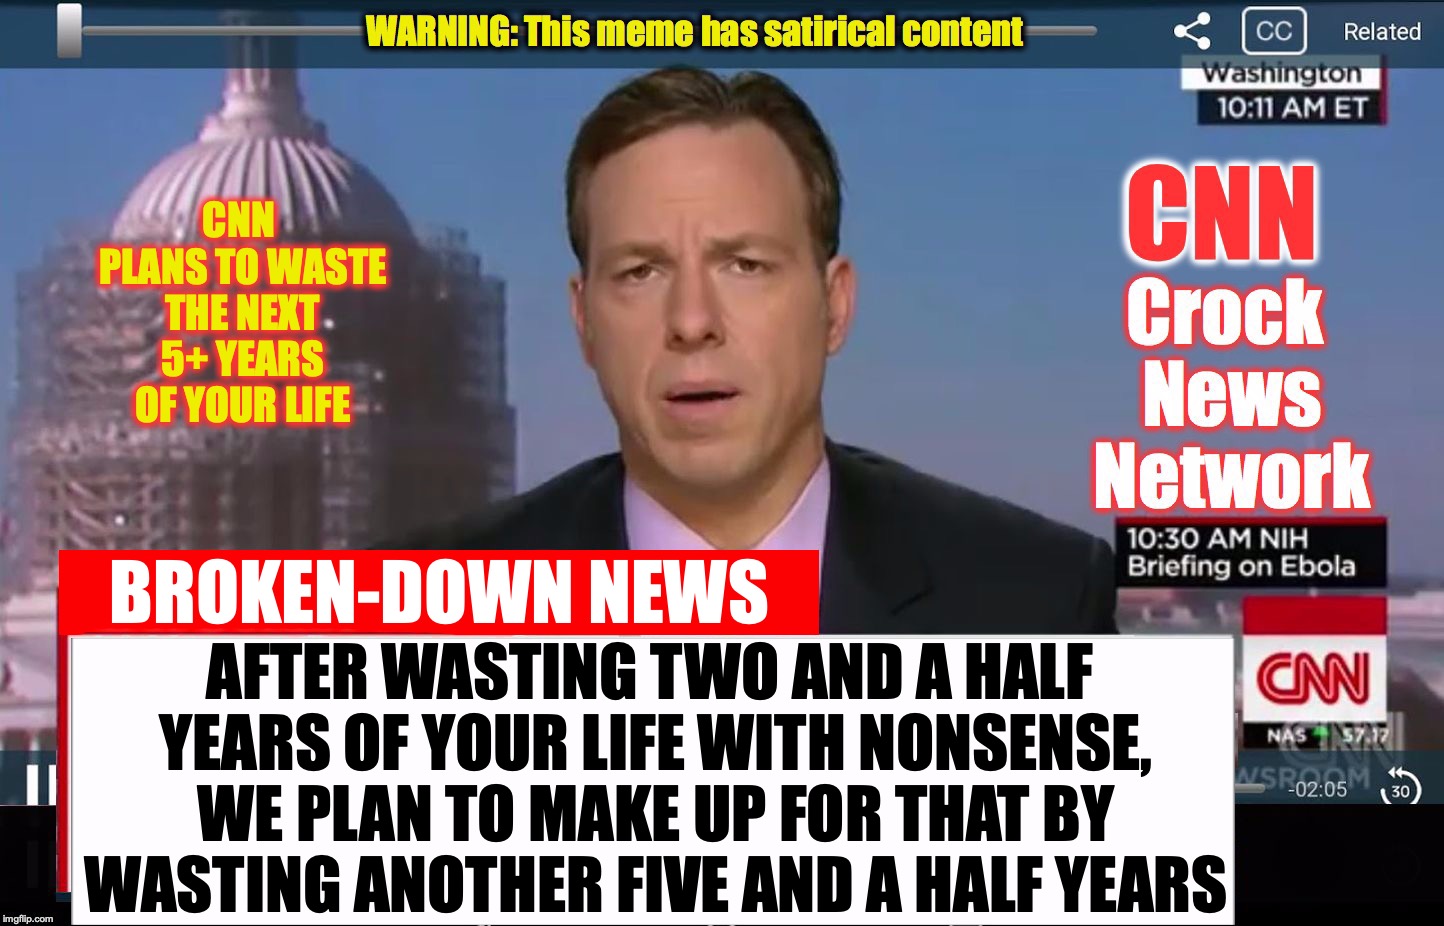 CNN PLANS TO WASTE THE NEXT 5+ YEARS OF YOUR LIFE; BROKEN-DOWN NEWS; AFTER WASTING TWO AND A HALF YEARS OF YOUR LIFE WITH NONSENSE, WE PLAN TO MAKE UP FOR THAT BY WASTING ANOTHER FIVE AND A HALF YEARS | image tagged in cnn breaking news | made w/ Imgflip meme maker